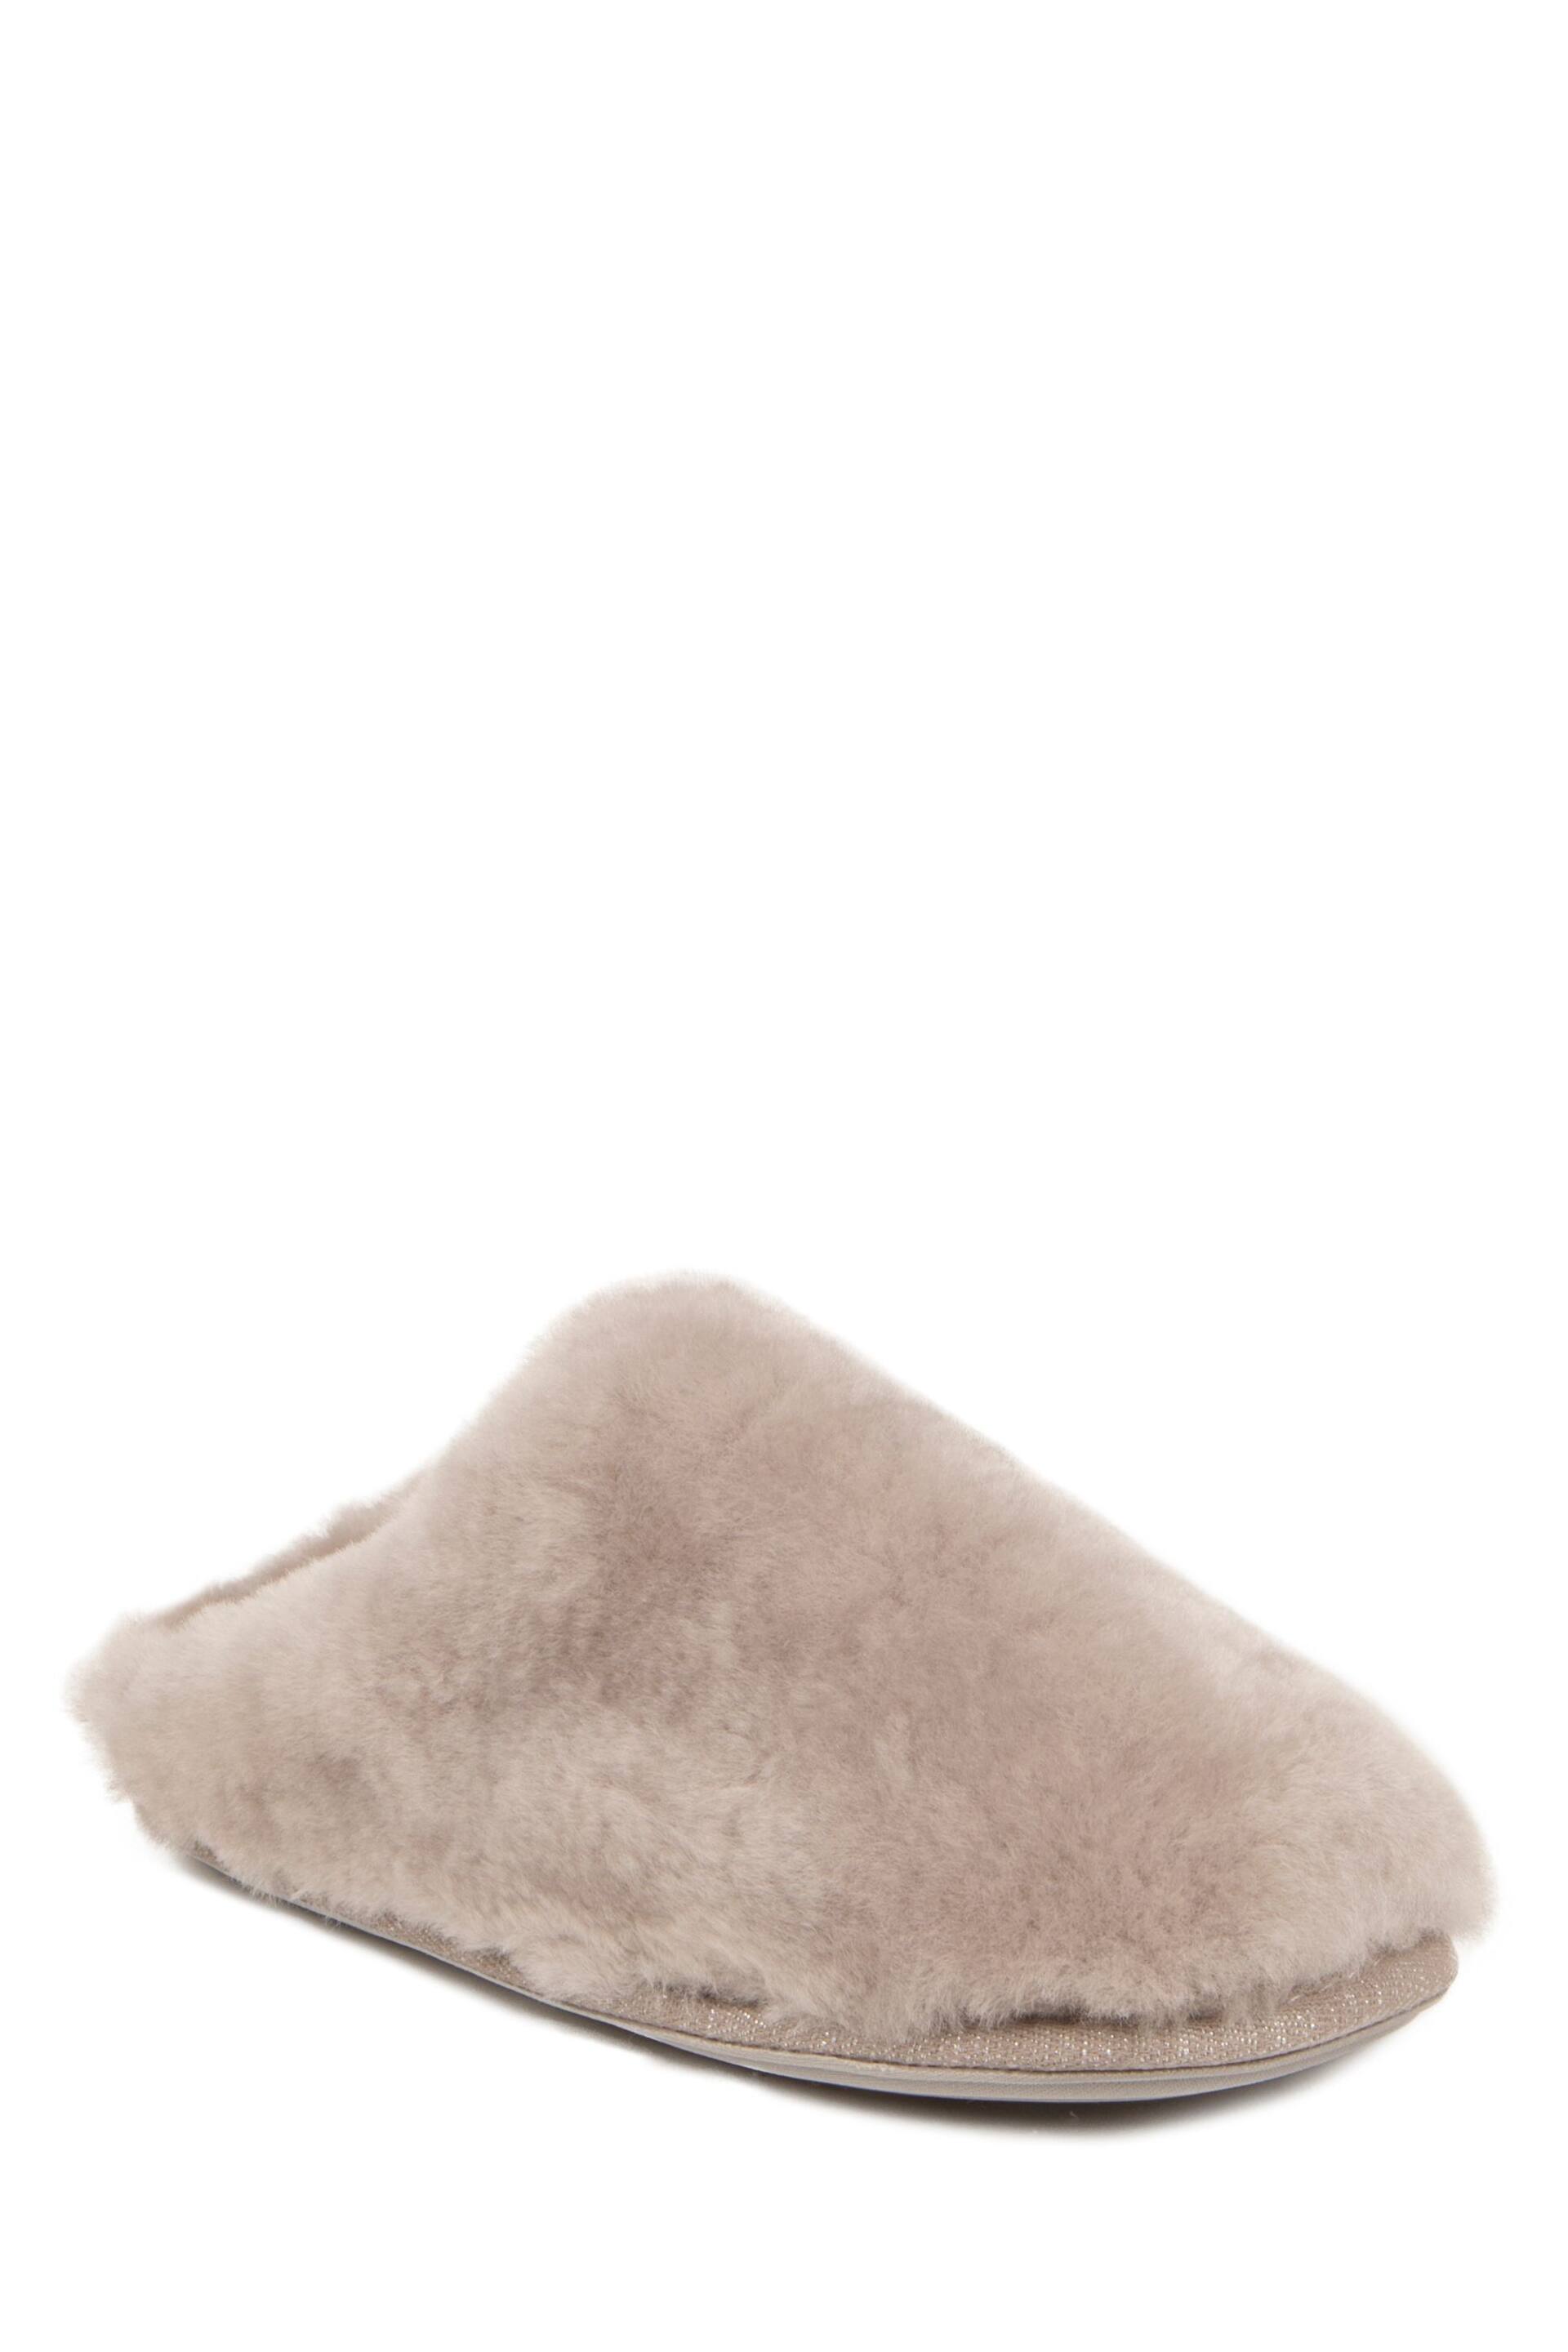 Just Sheepskin Grey Mens Donmar Slippers - Image 3 of 5